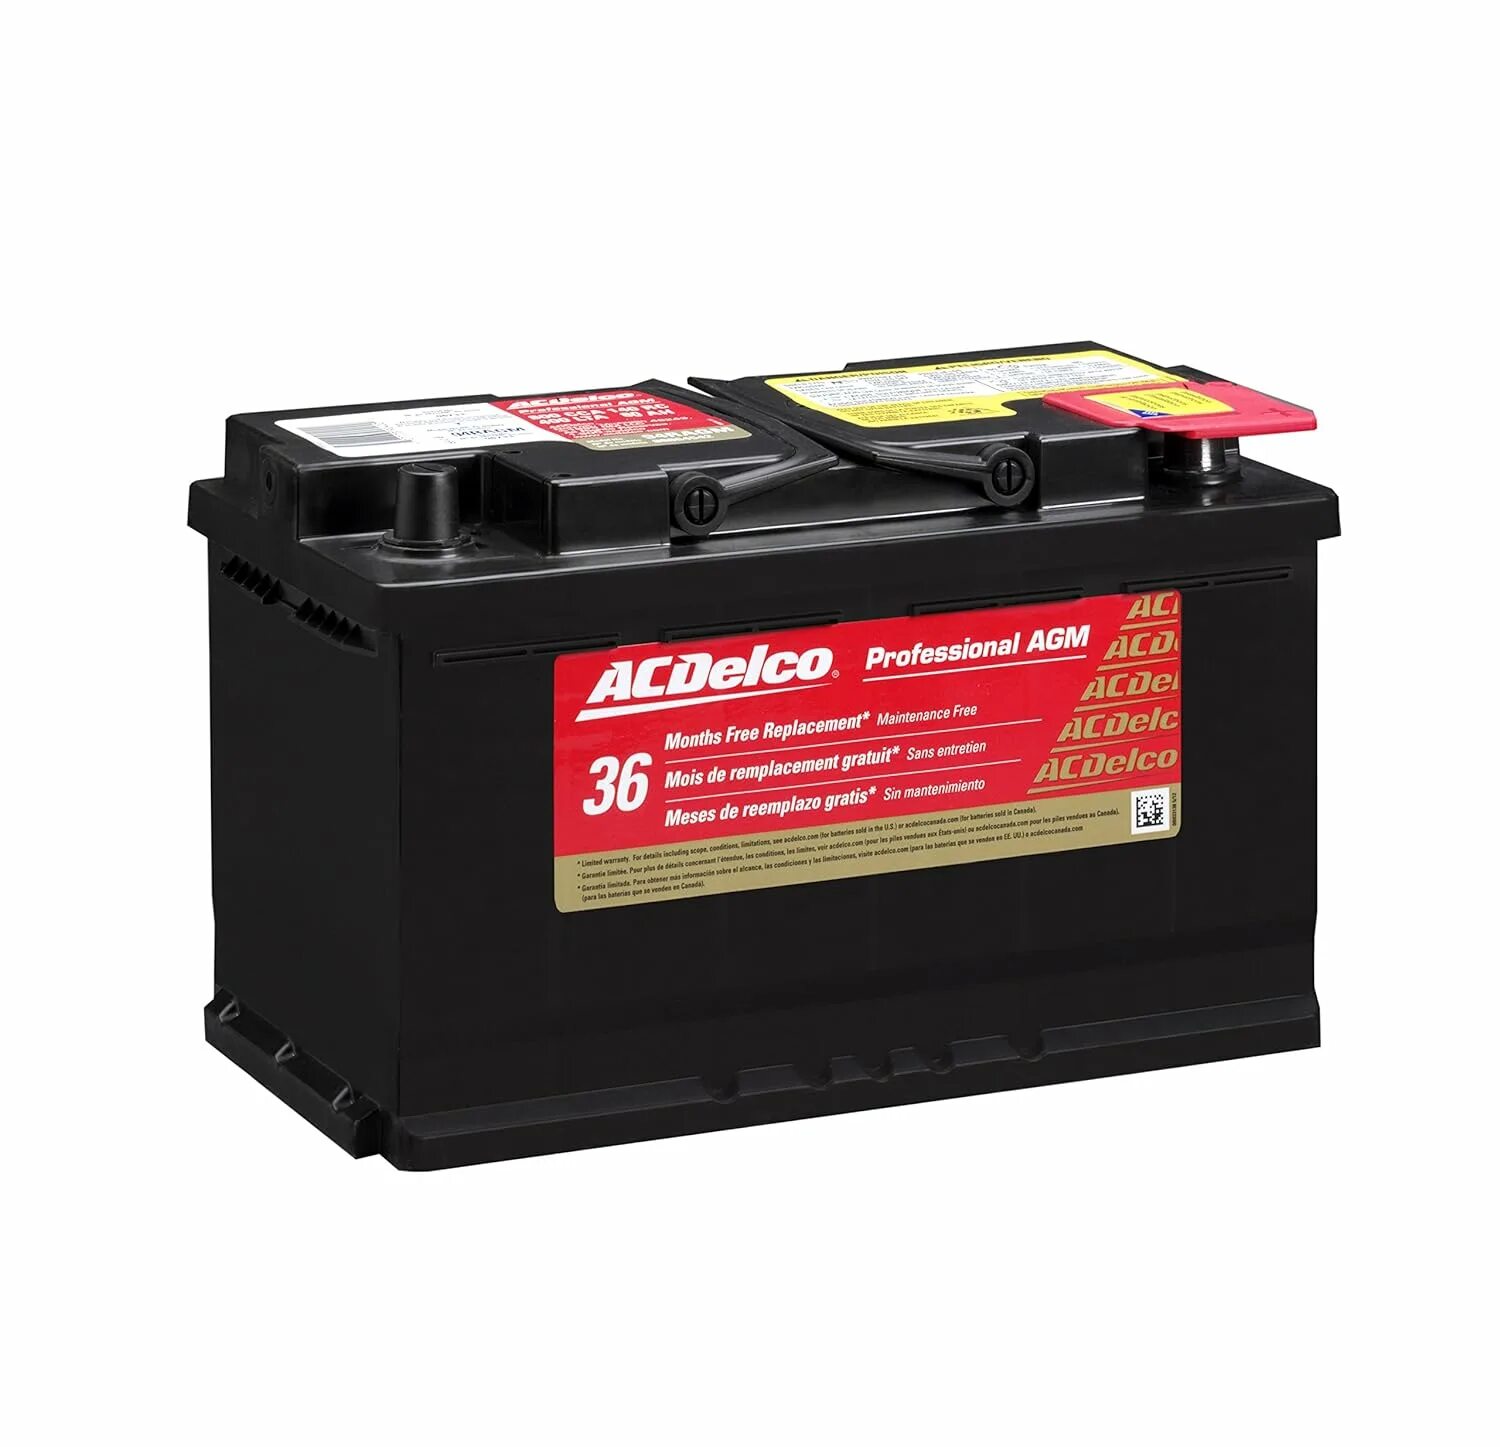 Better battery. 94ragm аккумулятор. АКБ ACDELCO 80ah AGM С Тахо. ACDELCO 47agm professional AGM Automotive BCI Group 47. ACDELCO #94r/PG.